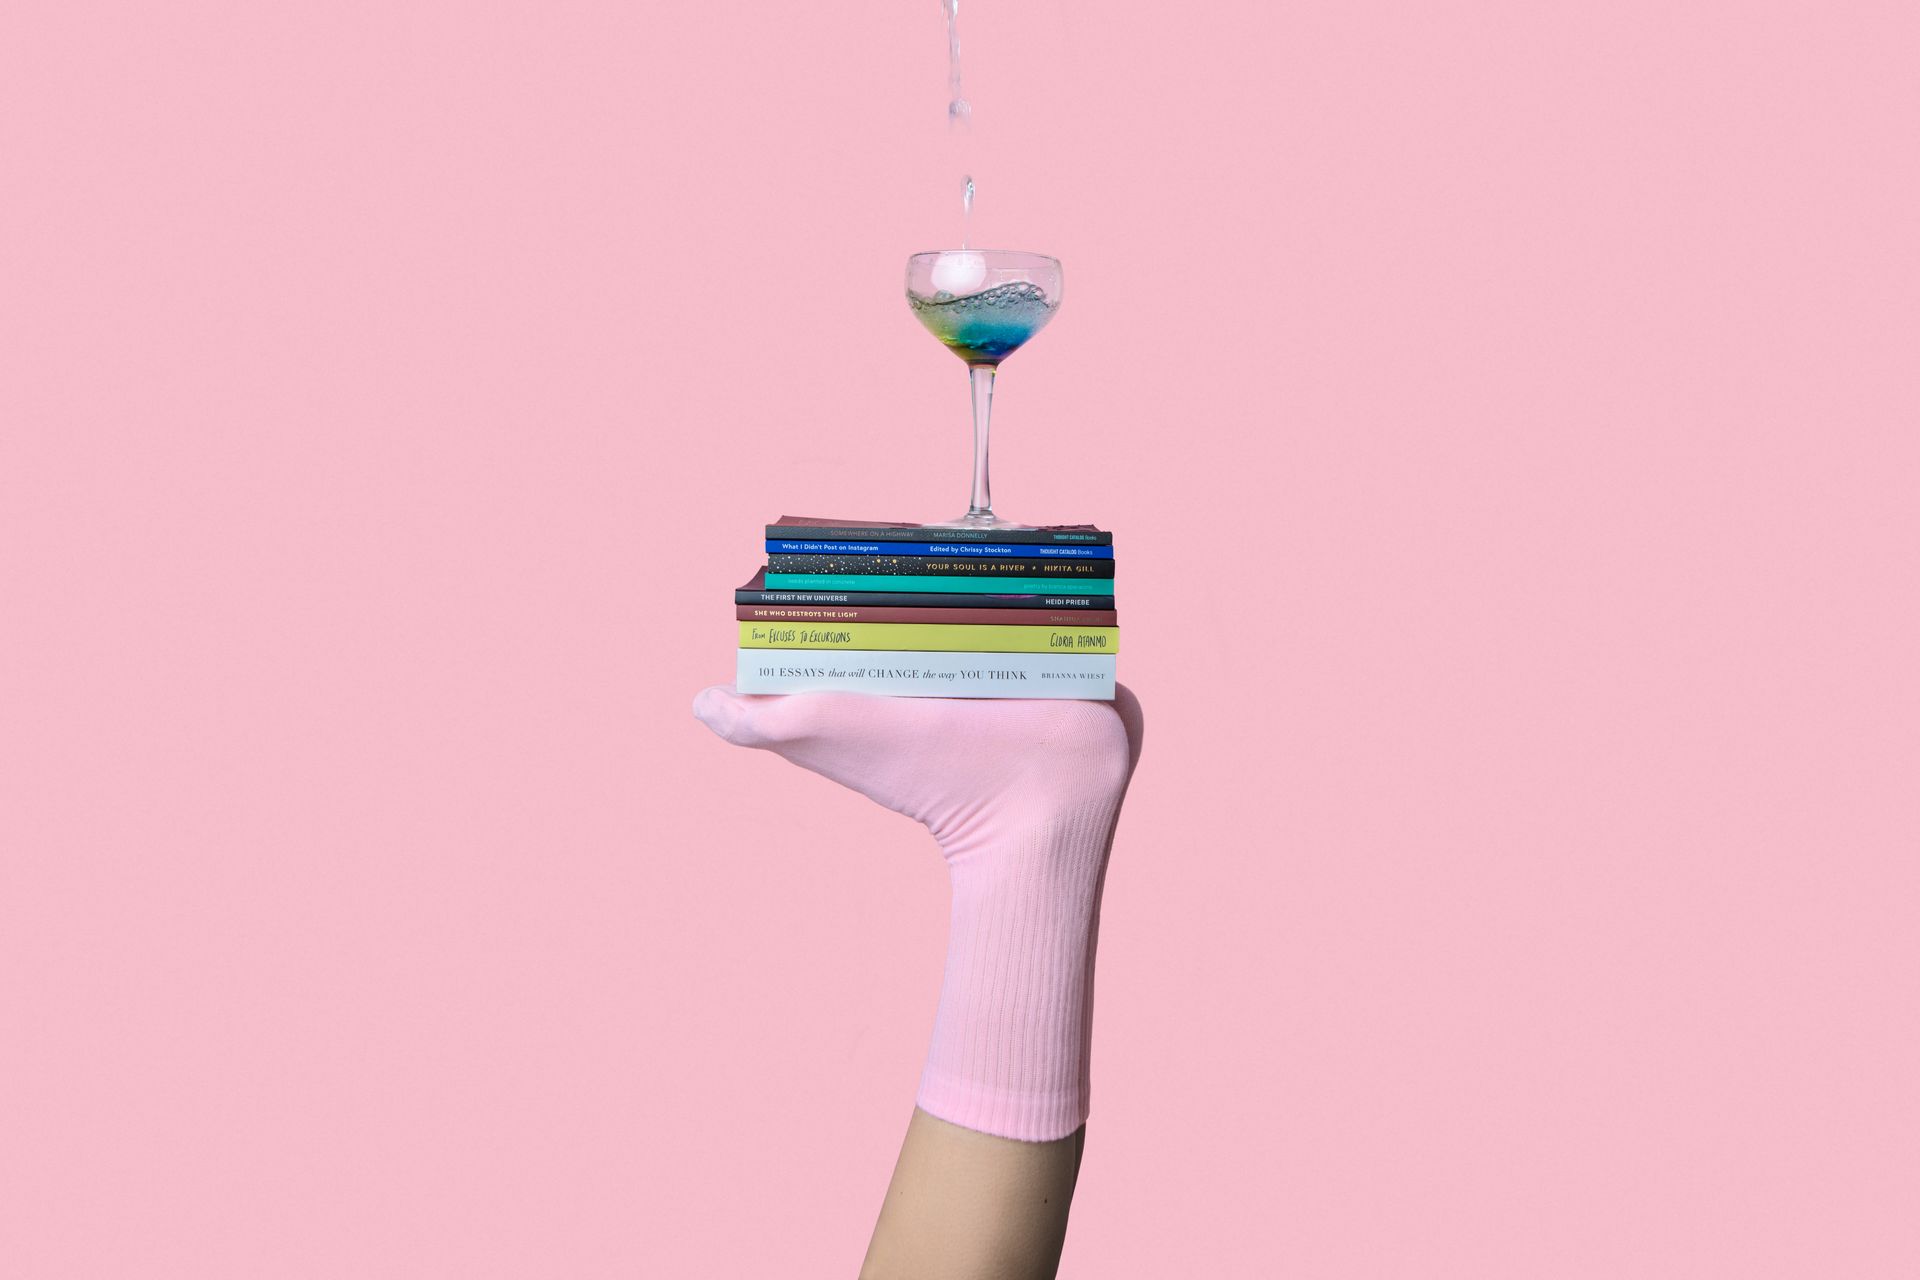 Feet balancing books with a cocktail glass on top over pink background